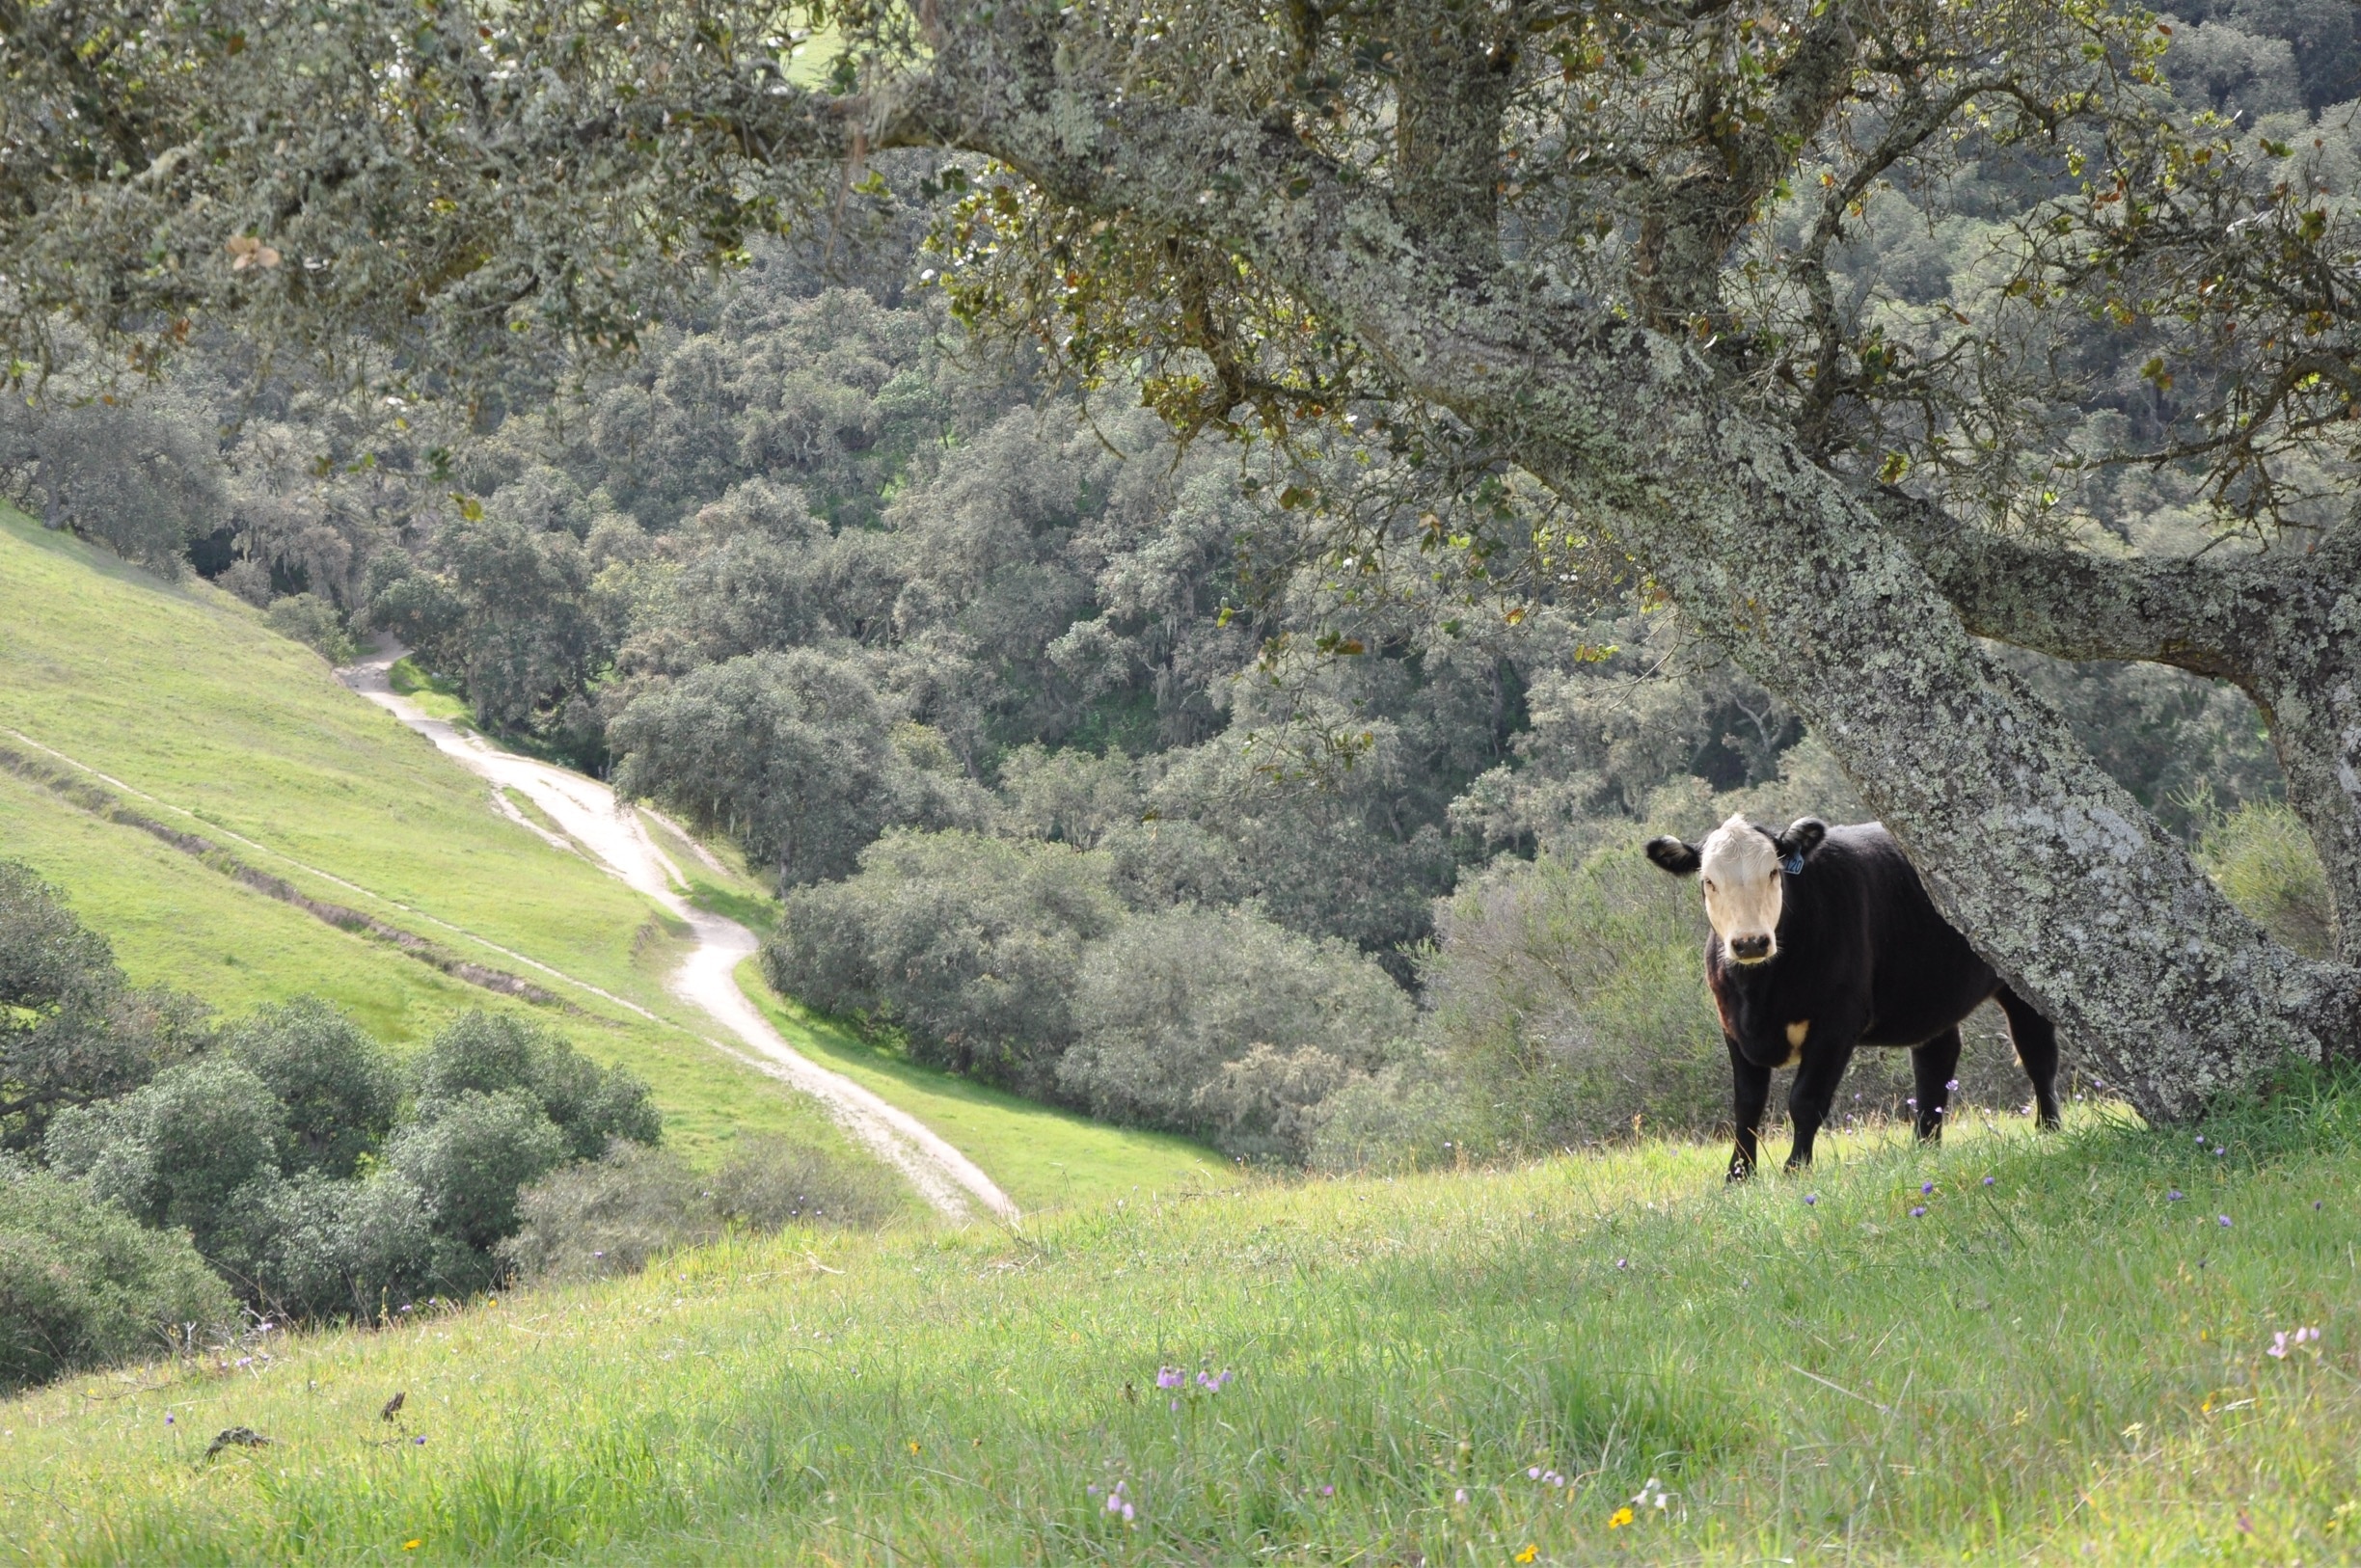 The name is 'Toro Park', but we didn't actually expect the cows...

On the east side of the park, along Mark's Canyon Trail, the whole hillside was covered with California poppies and Lupine! 

Beautiful.